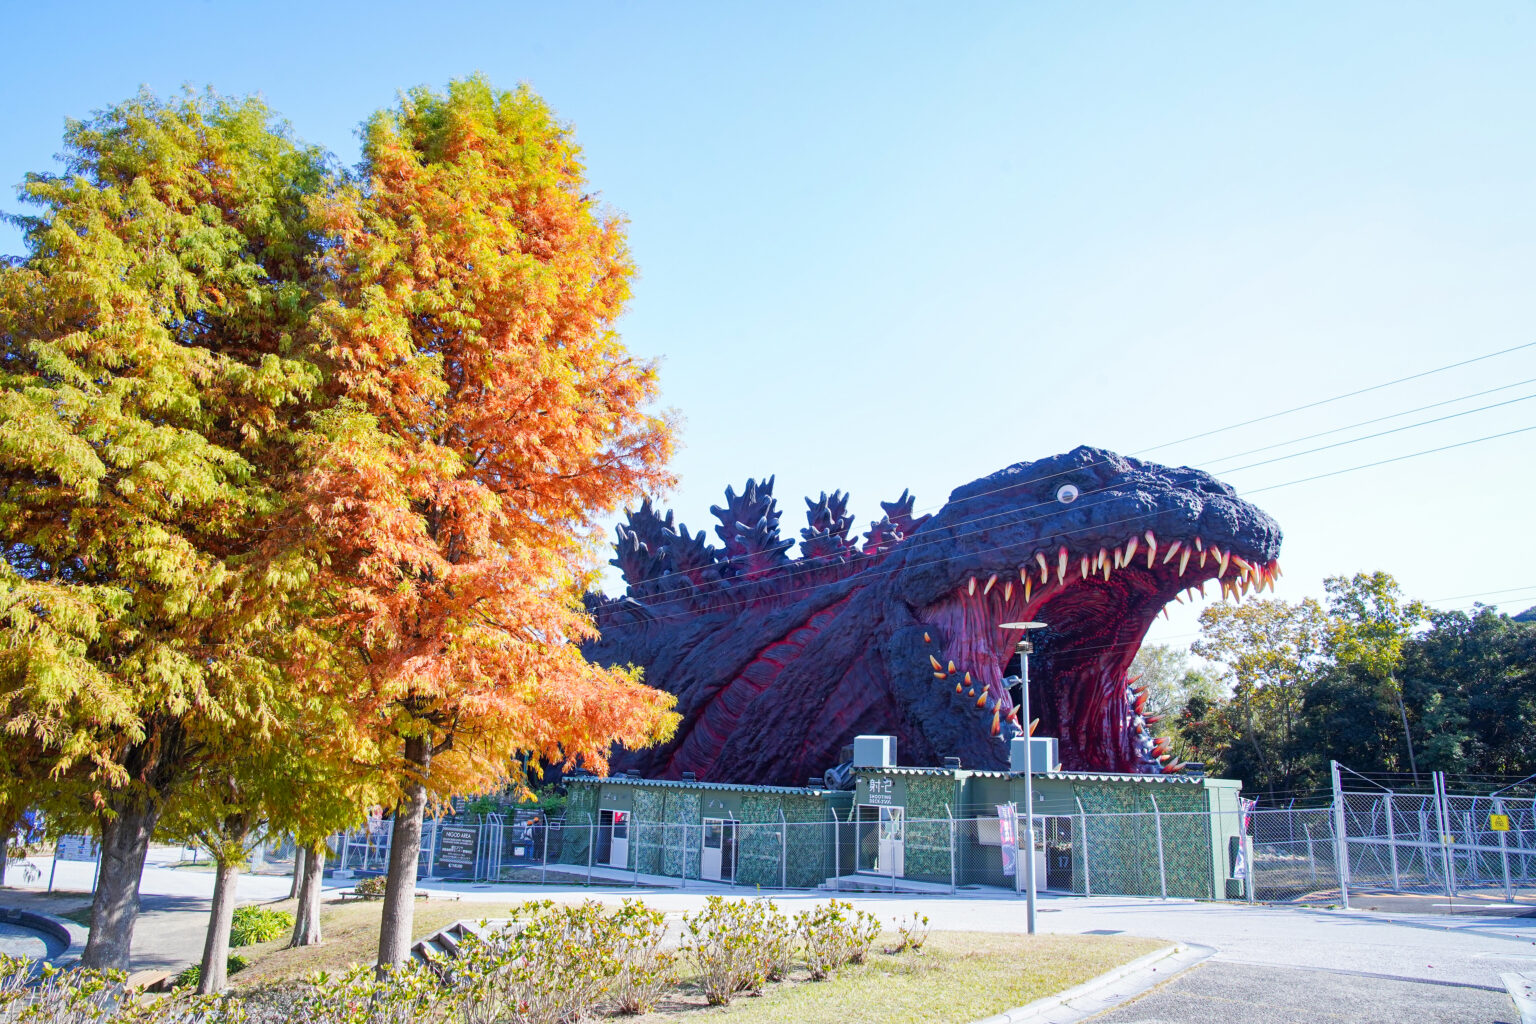 Anime Lovers Will Love This Theme Park in Awaji